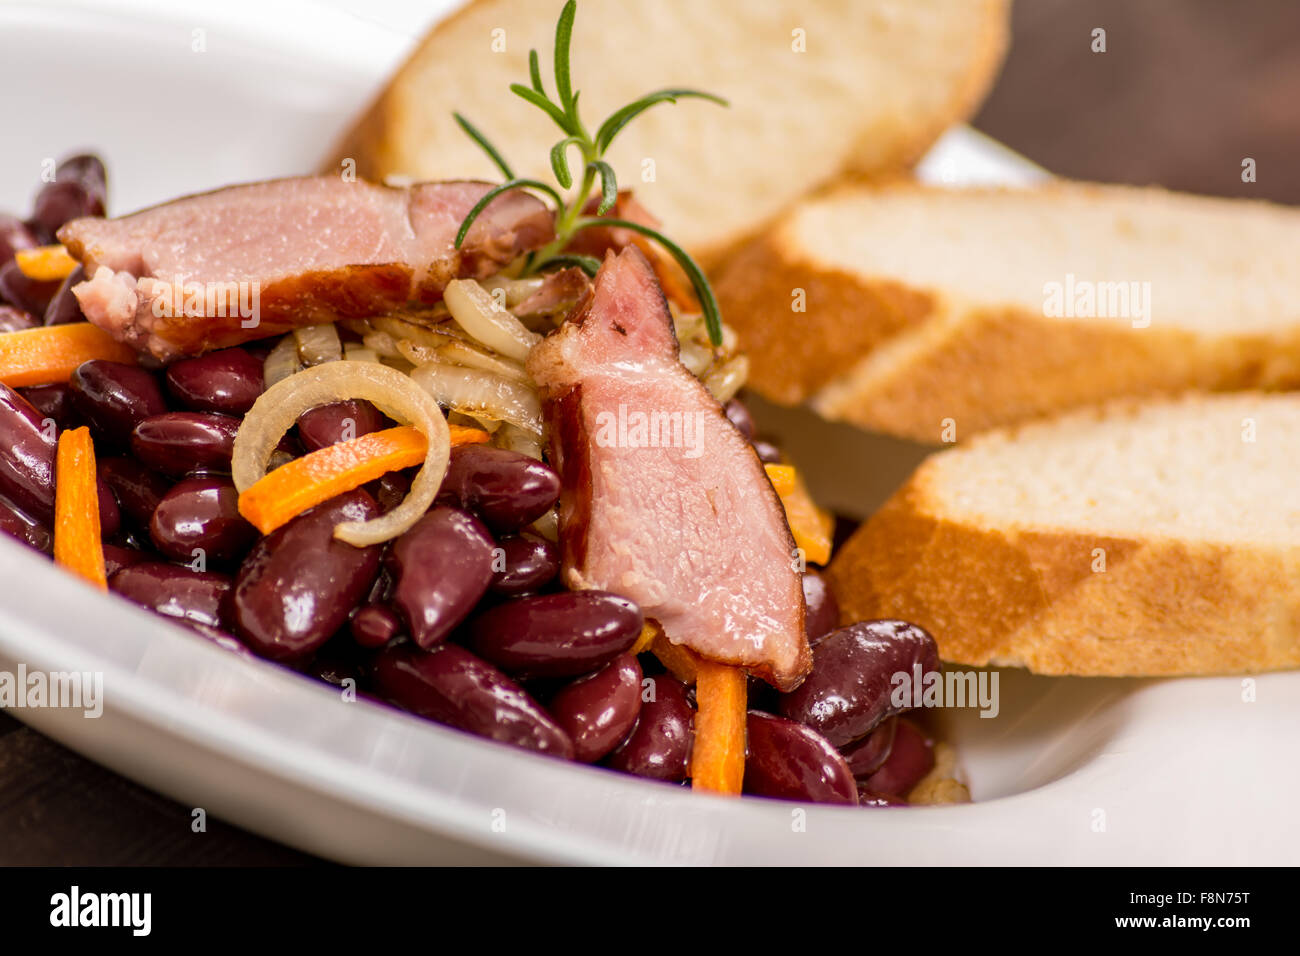 Traditional red beans with meat and vegetables Stock Photo